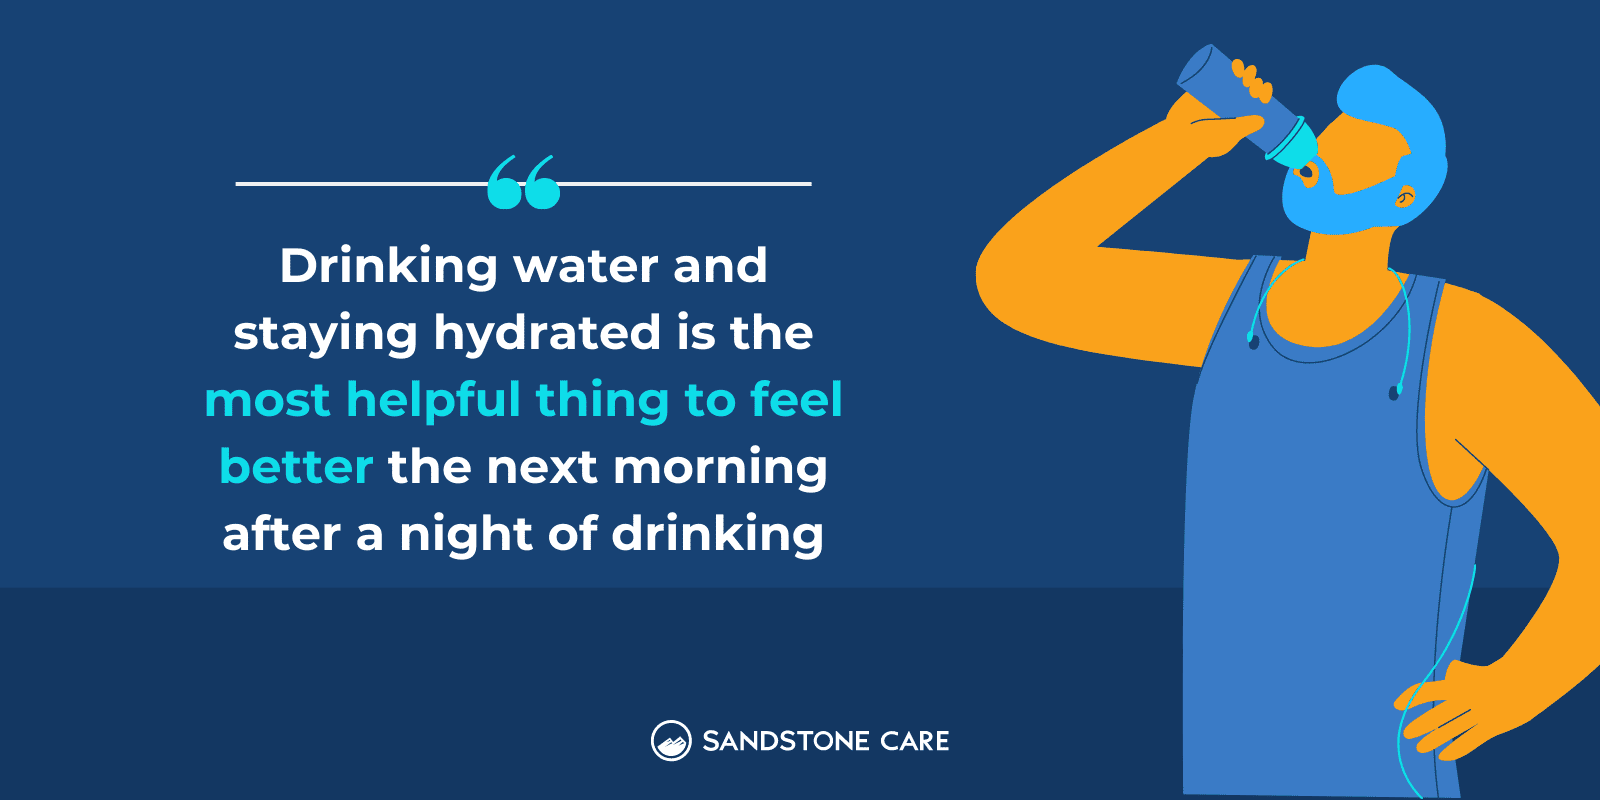 An illustration of a person drinking water next to a quote emphasizing the importance of hydration in alcohol hangover